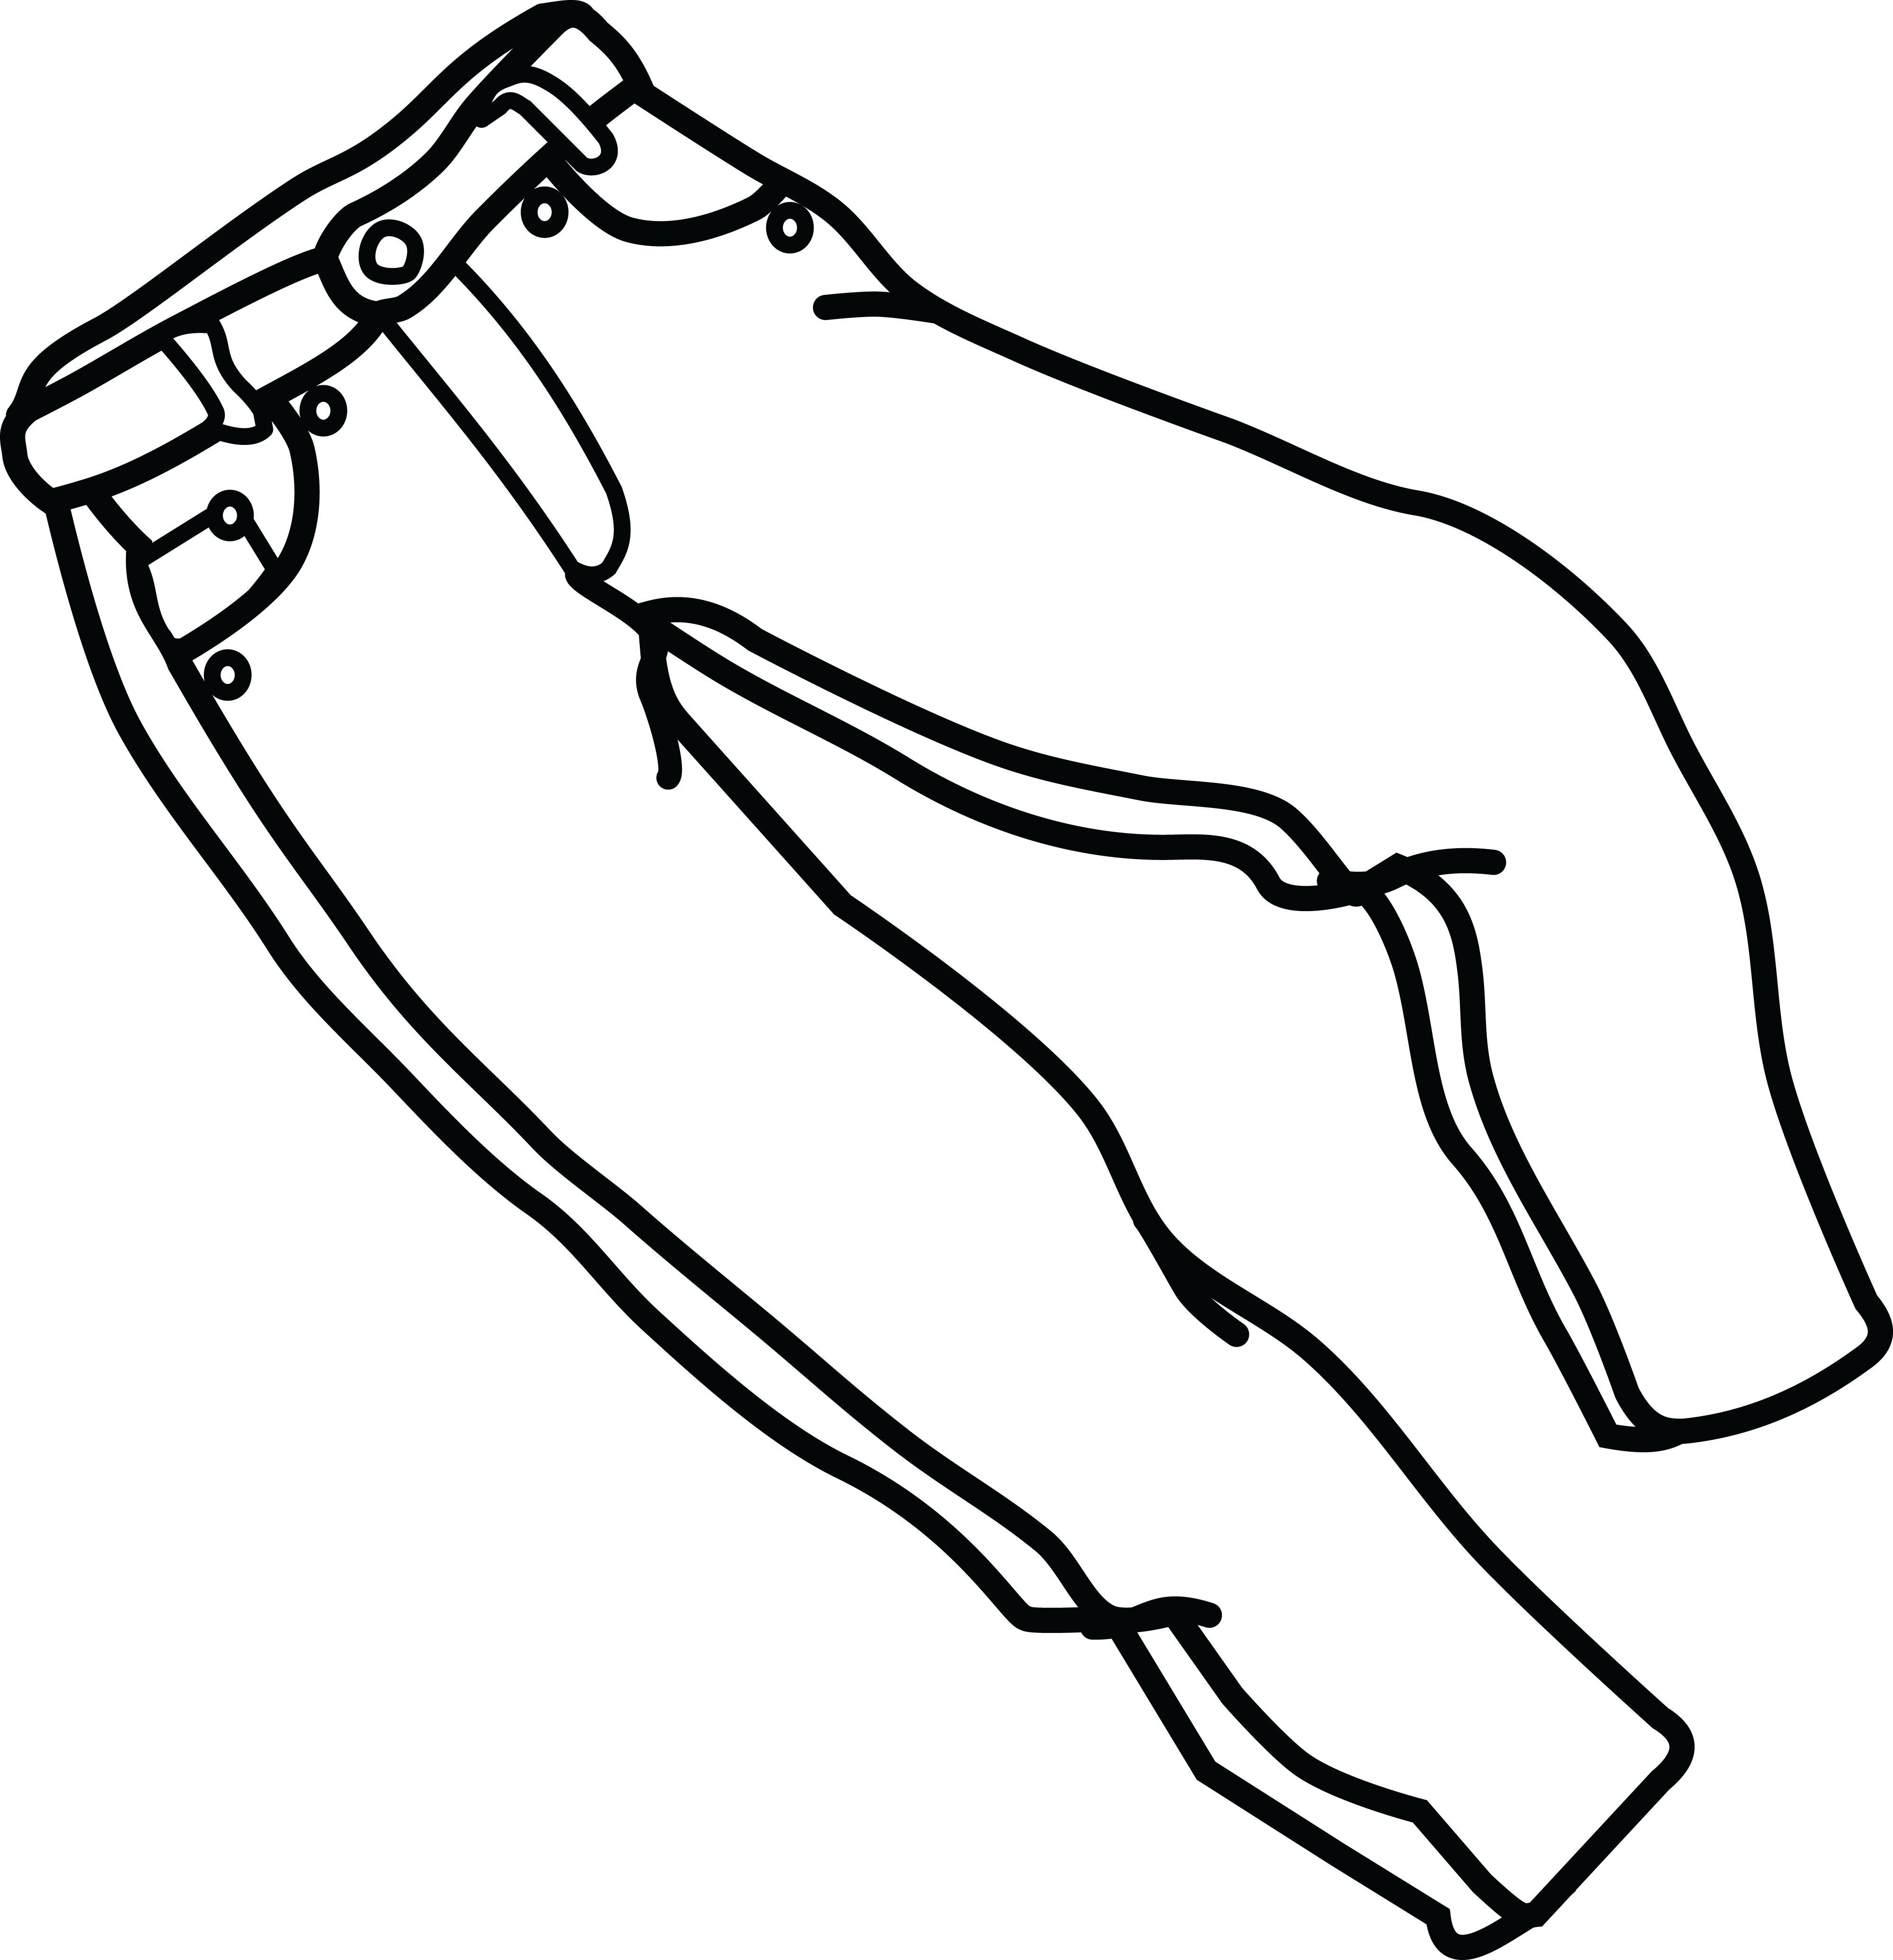 Free Clipart Of A pair of jeans #00011288 .